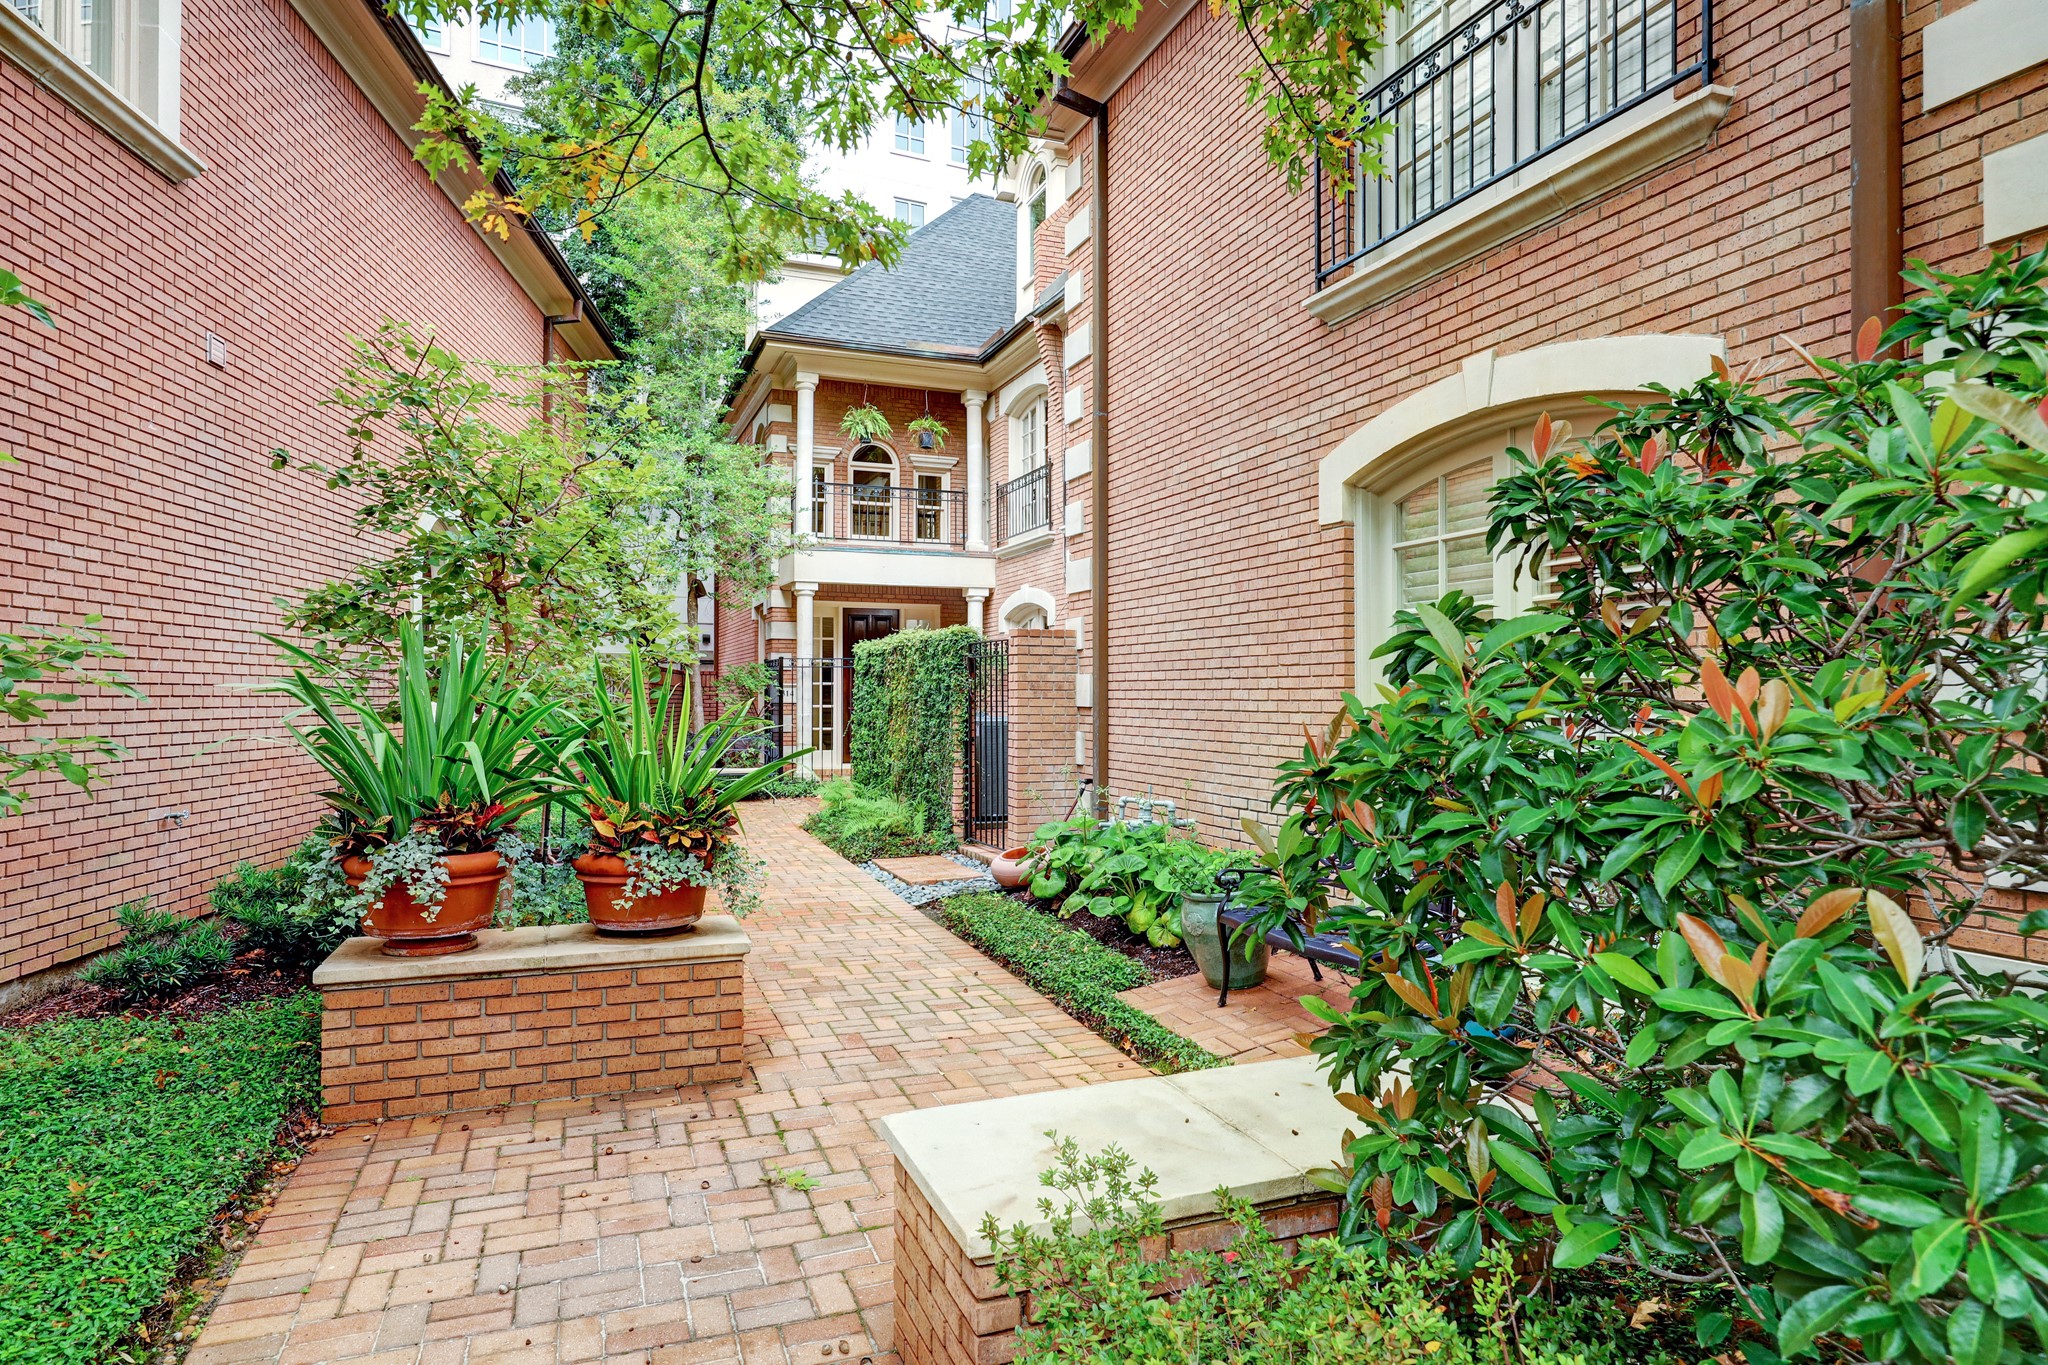 This beautiful brick lined walk way leads you to the entrance of this gracious townhome.